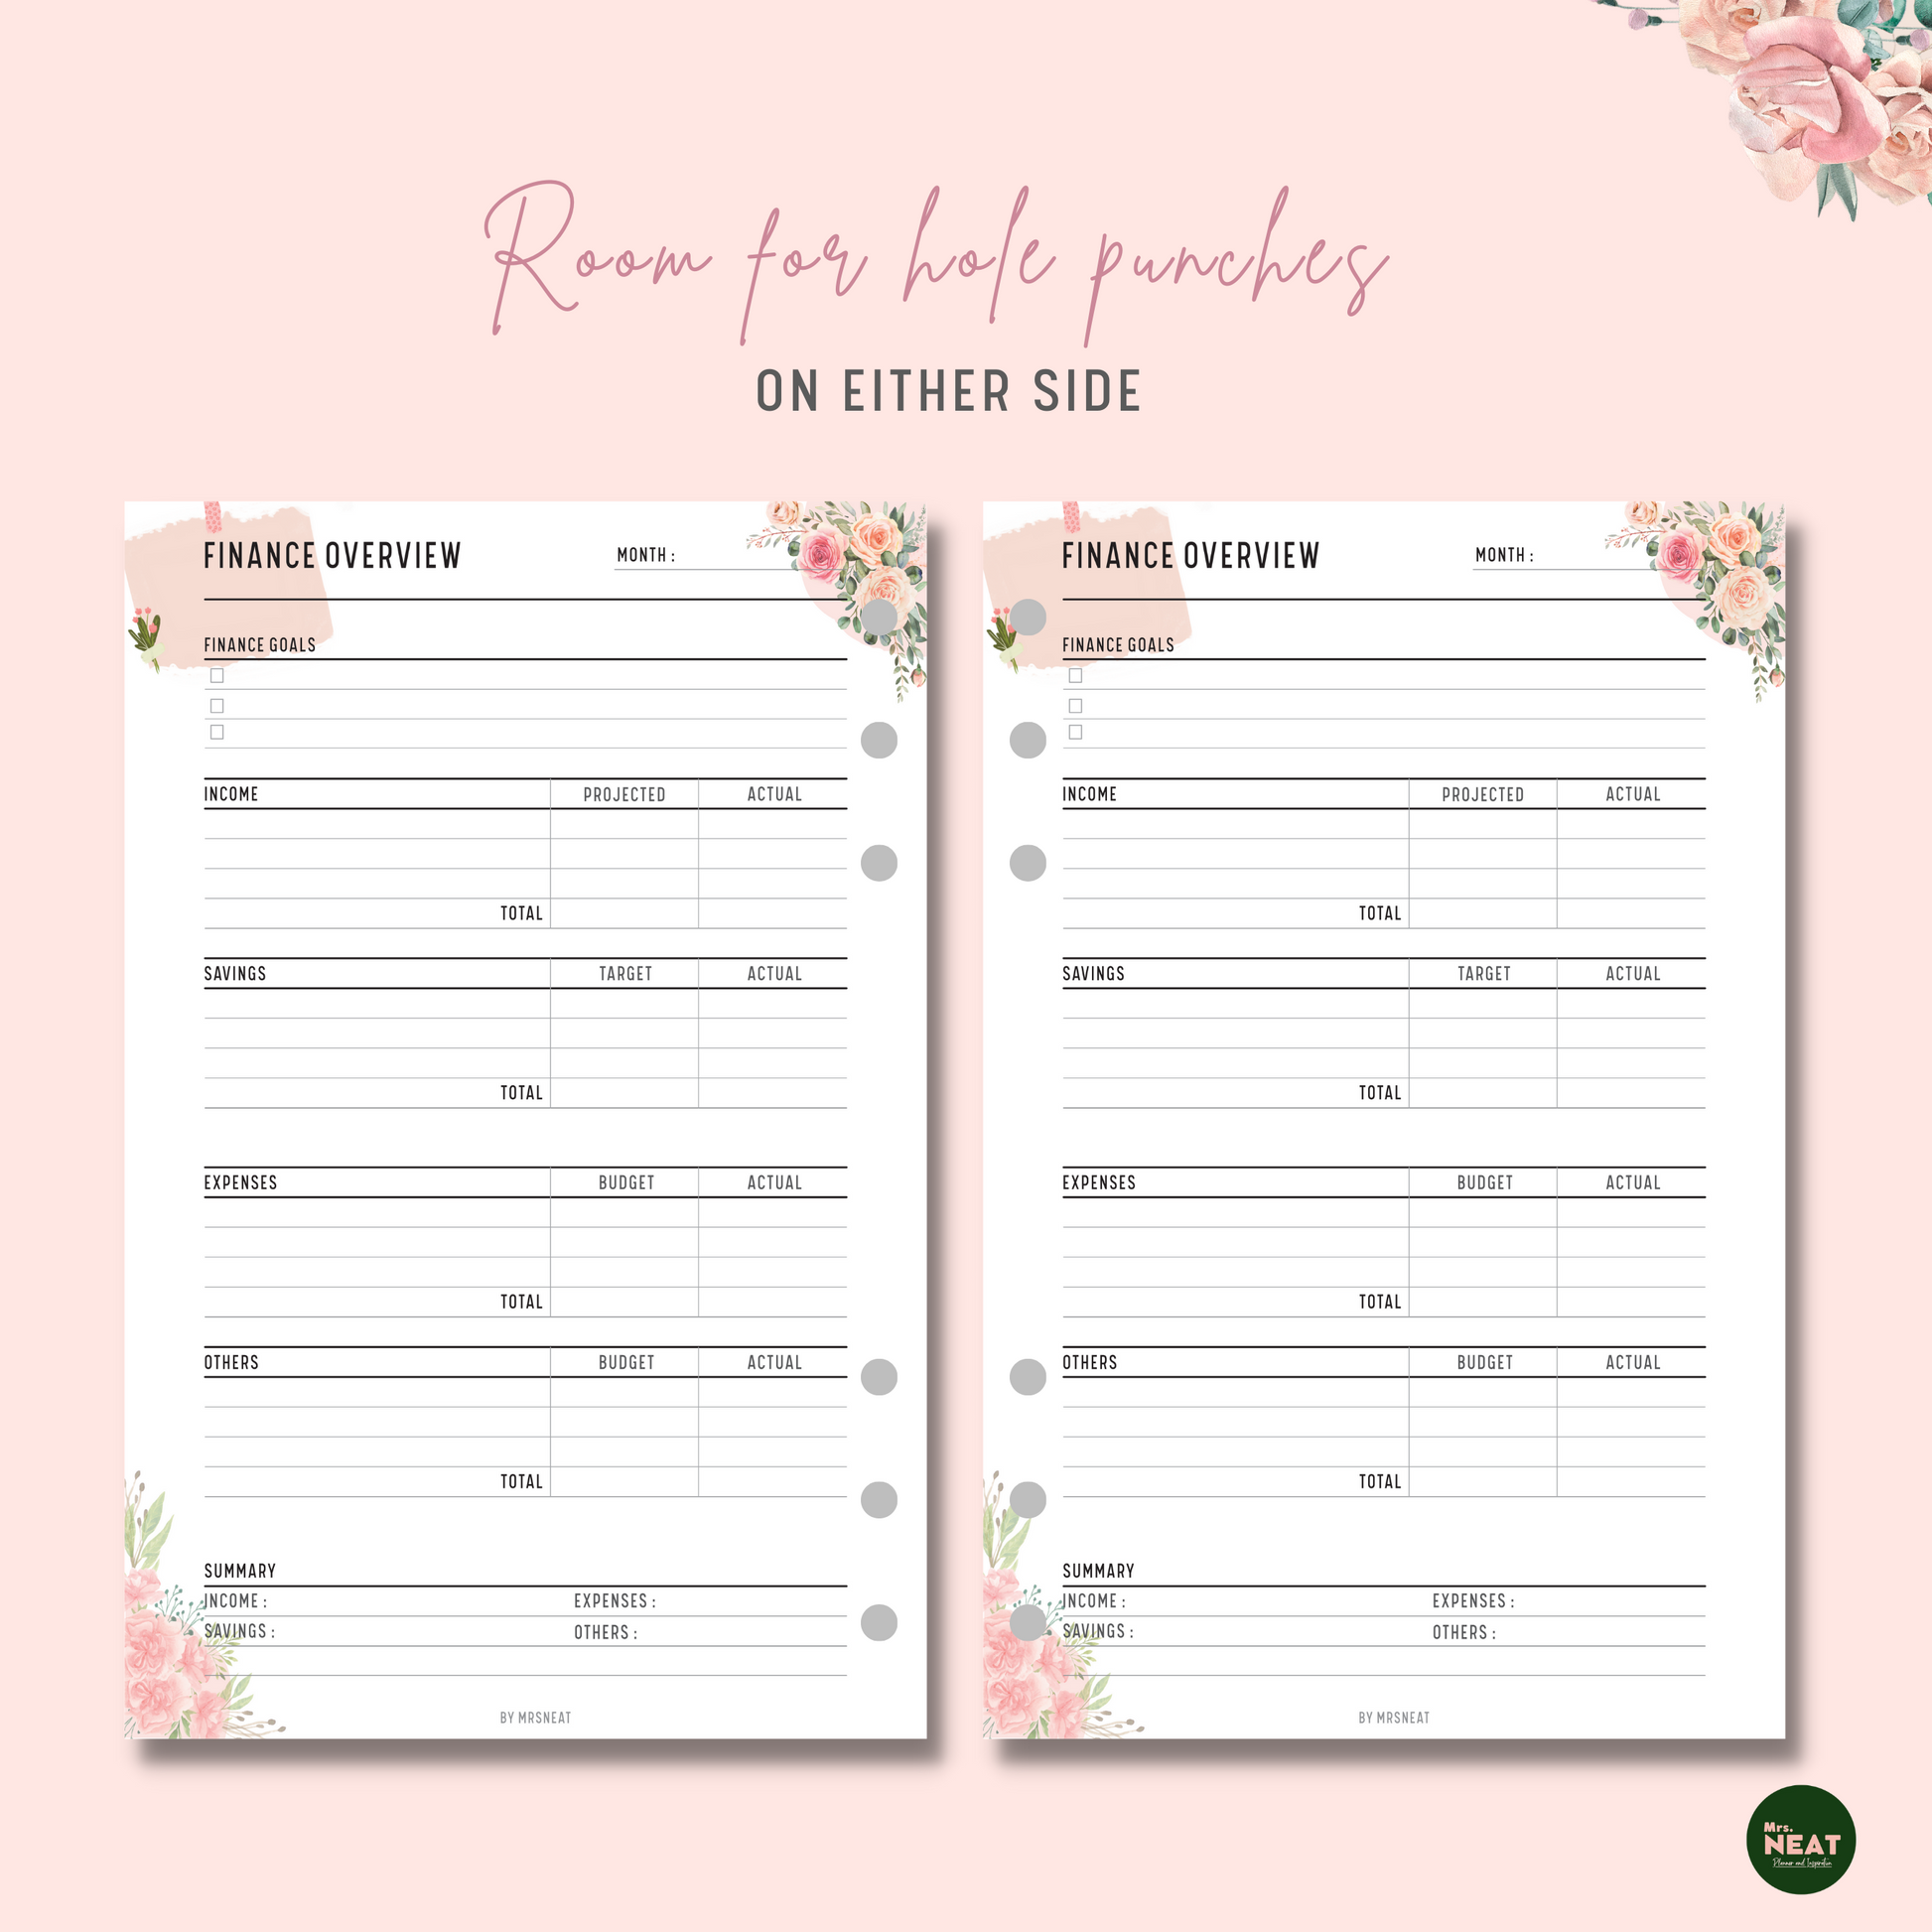 Floral Pink Financial Overview Planner with room for hole punches on either side